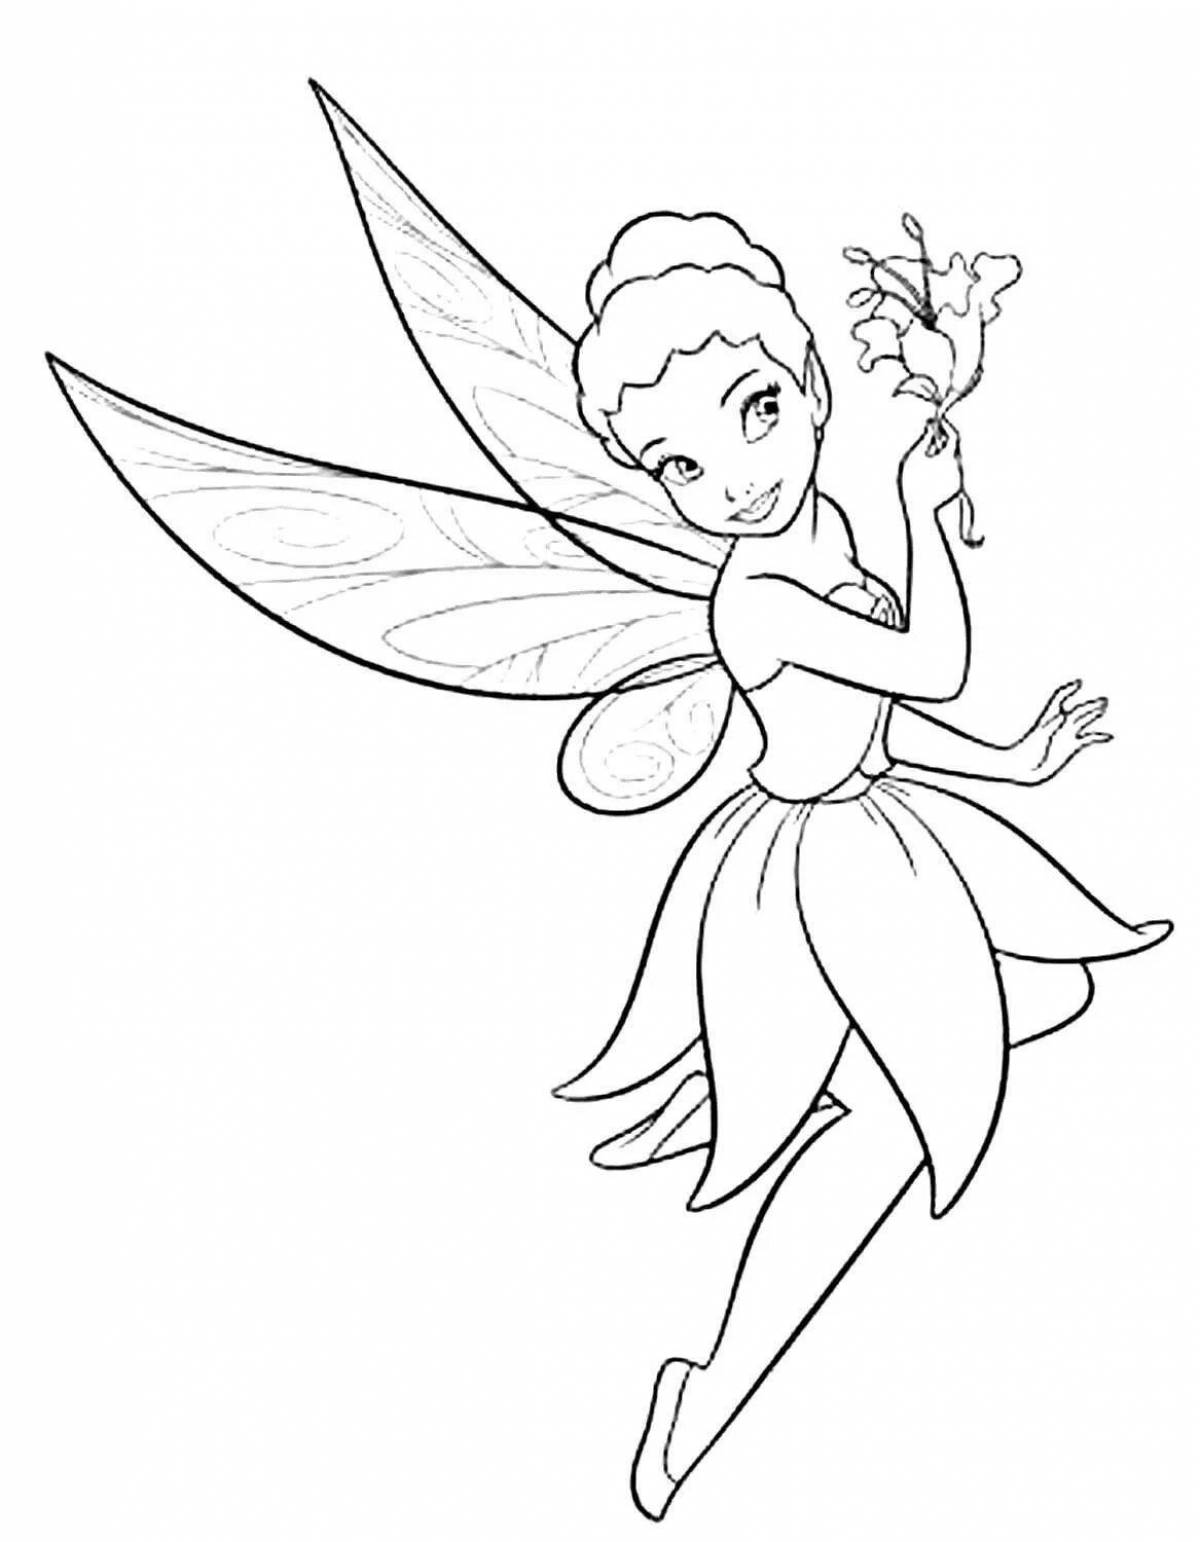 Majestic fairy coloring pages for girls